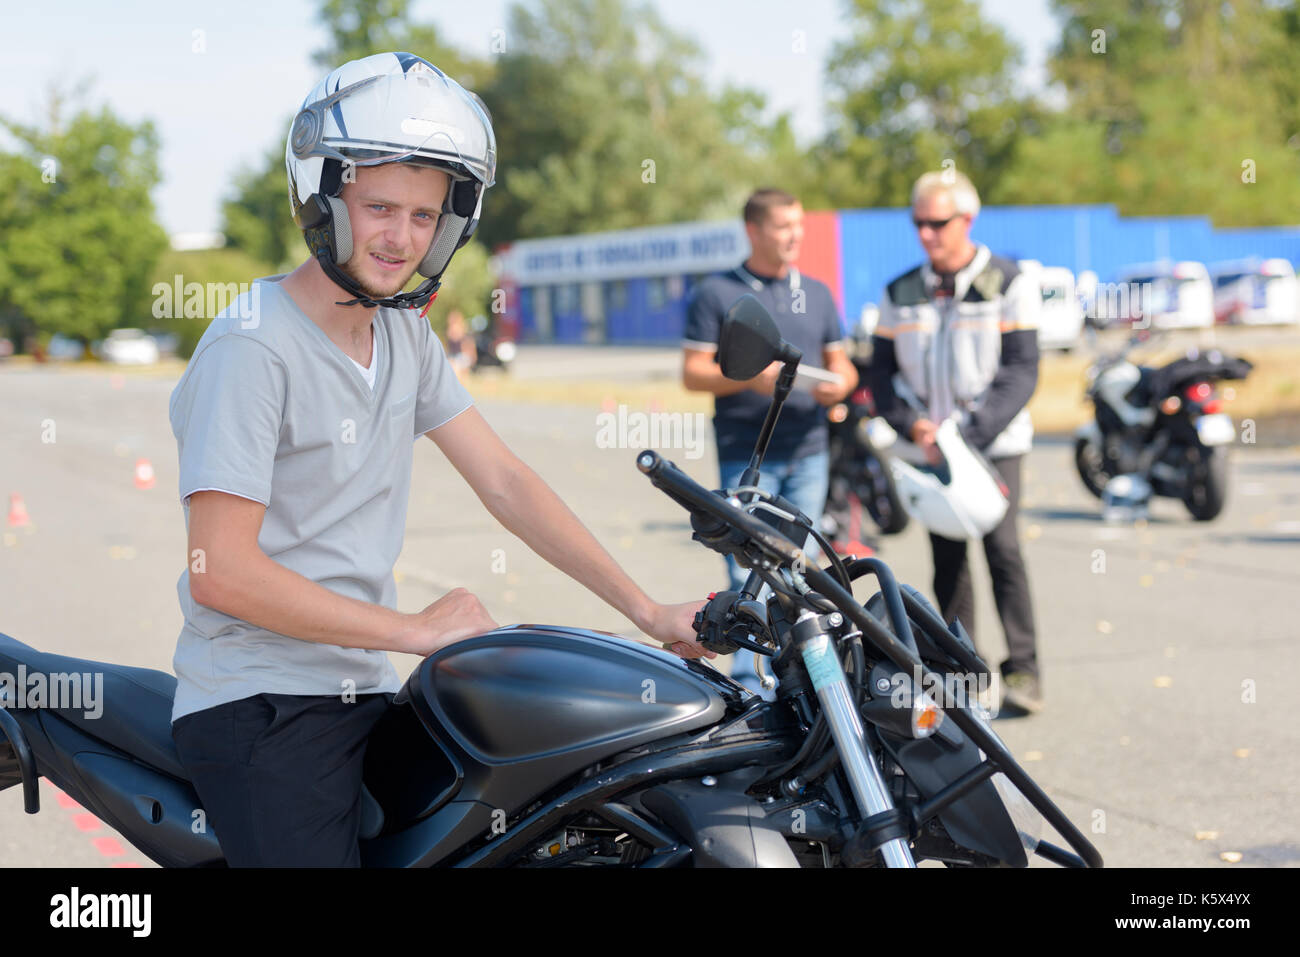 young motorcyclist gets ready to start exercise Stock Photo